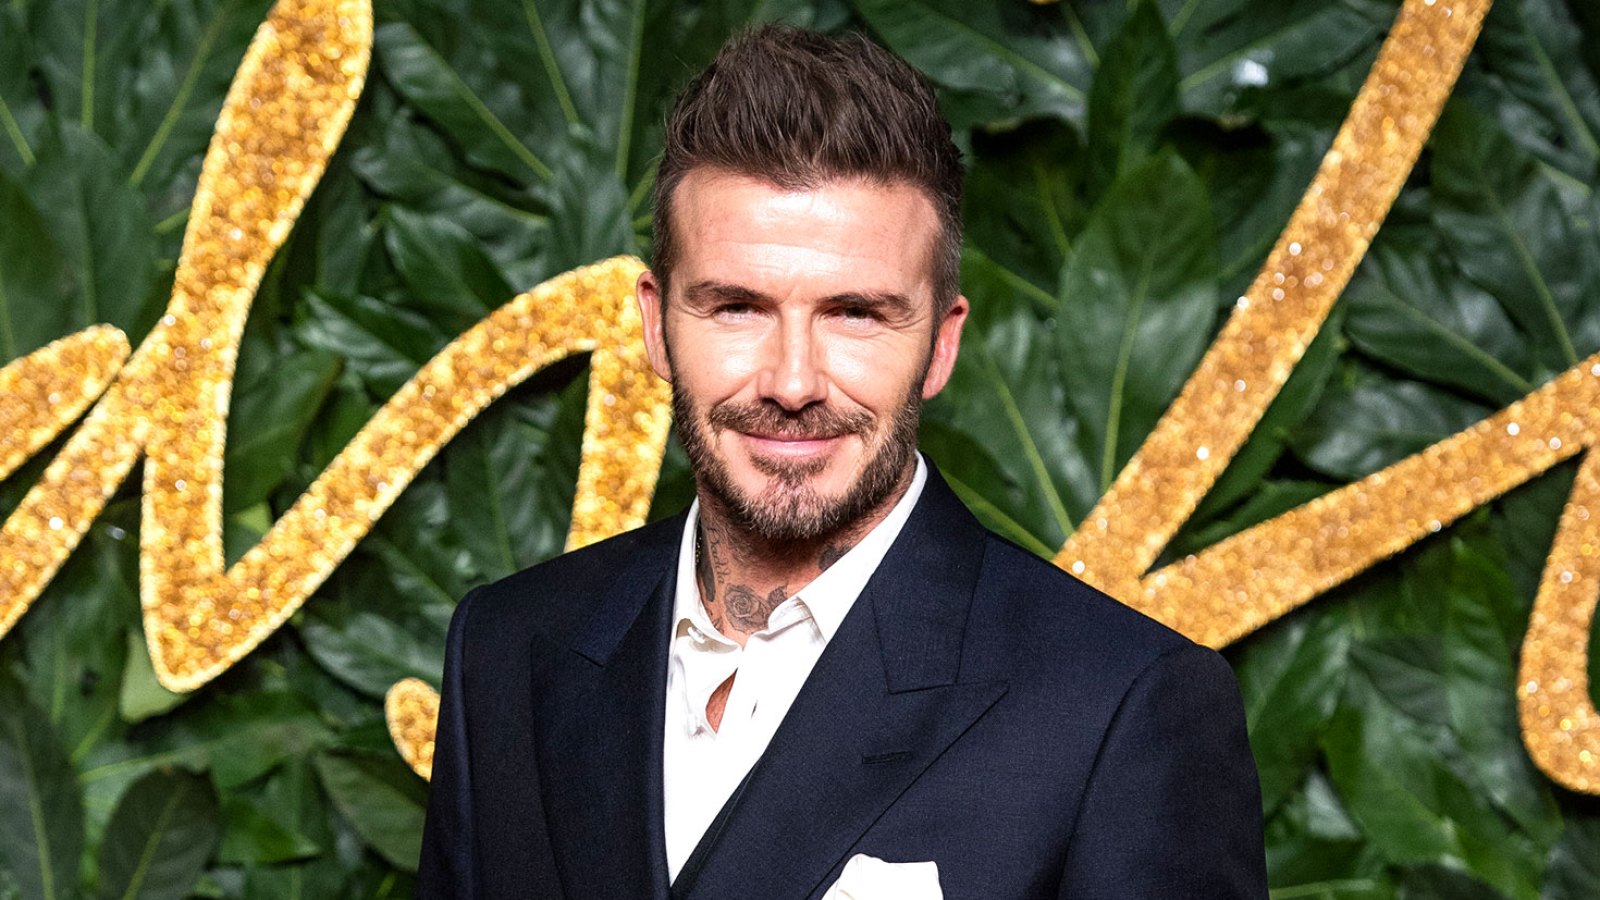 David Beckham just coached you (and us) on warm-weather tailoring